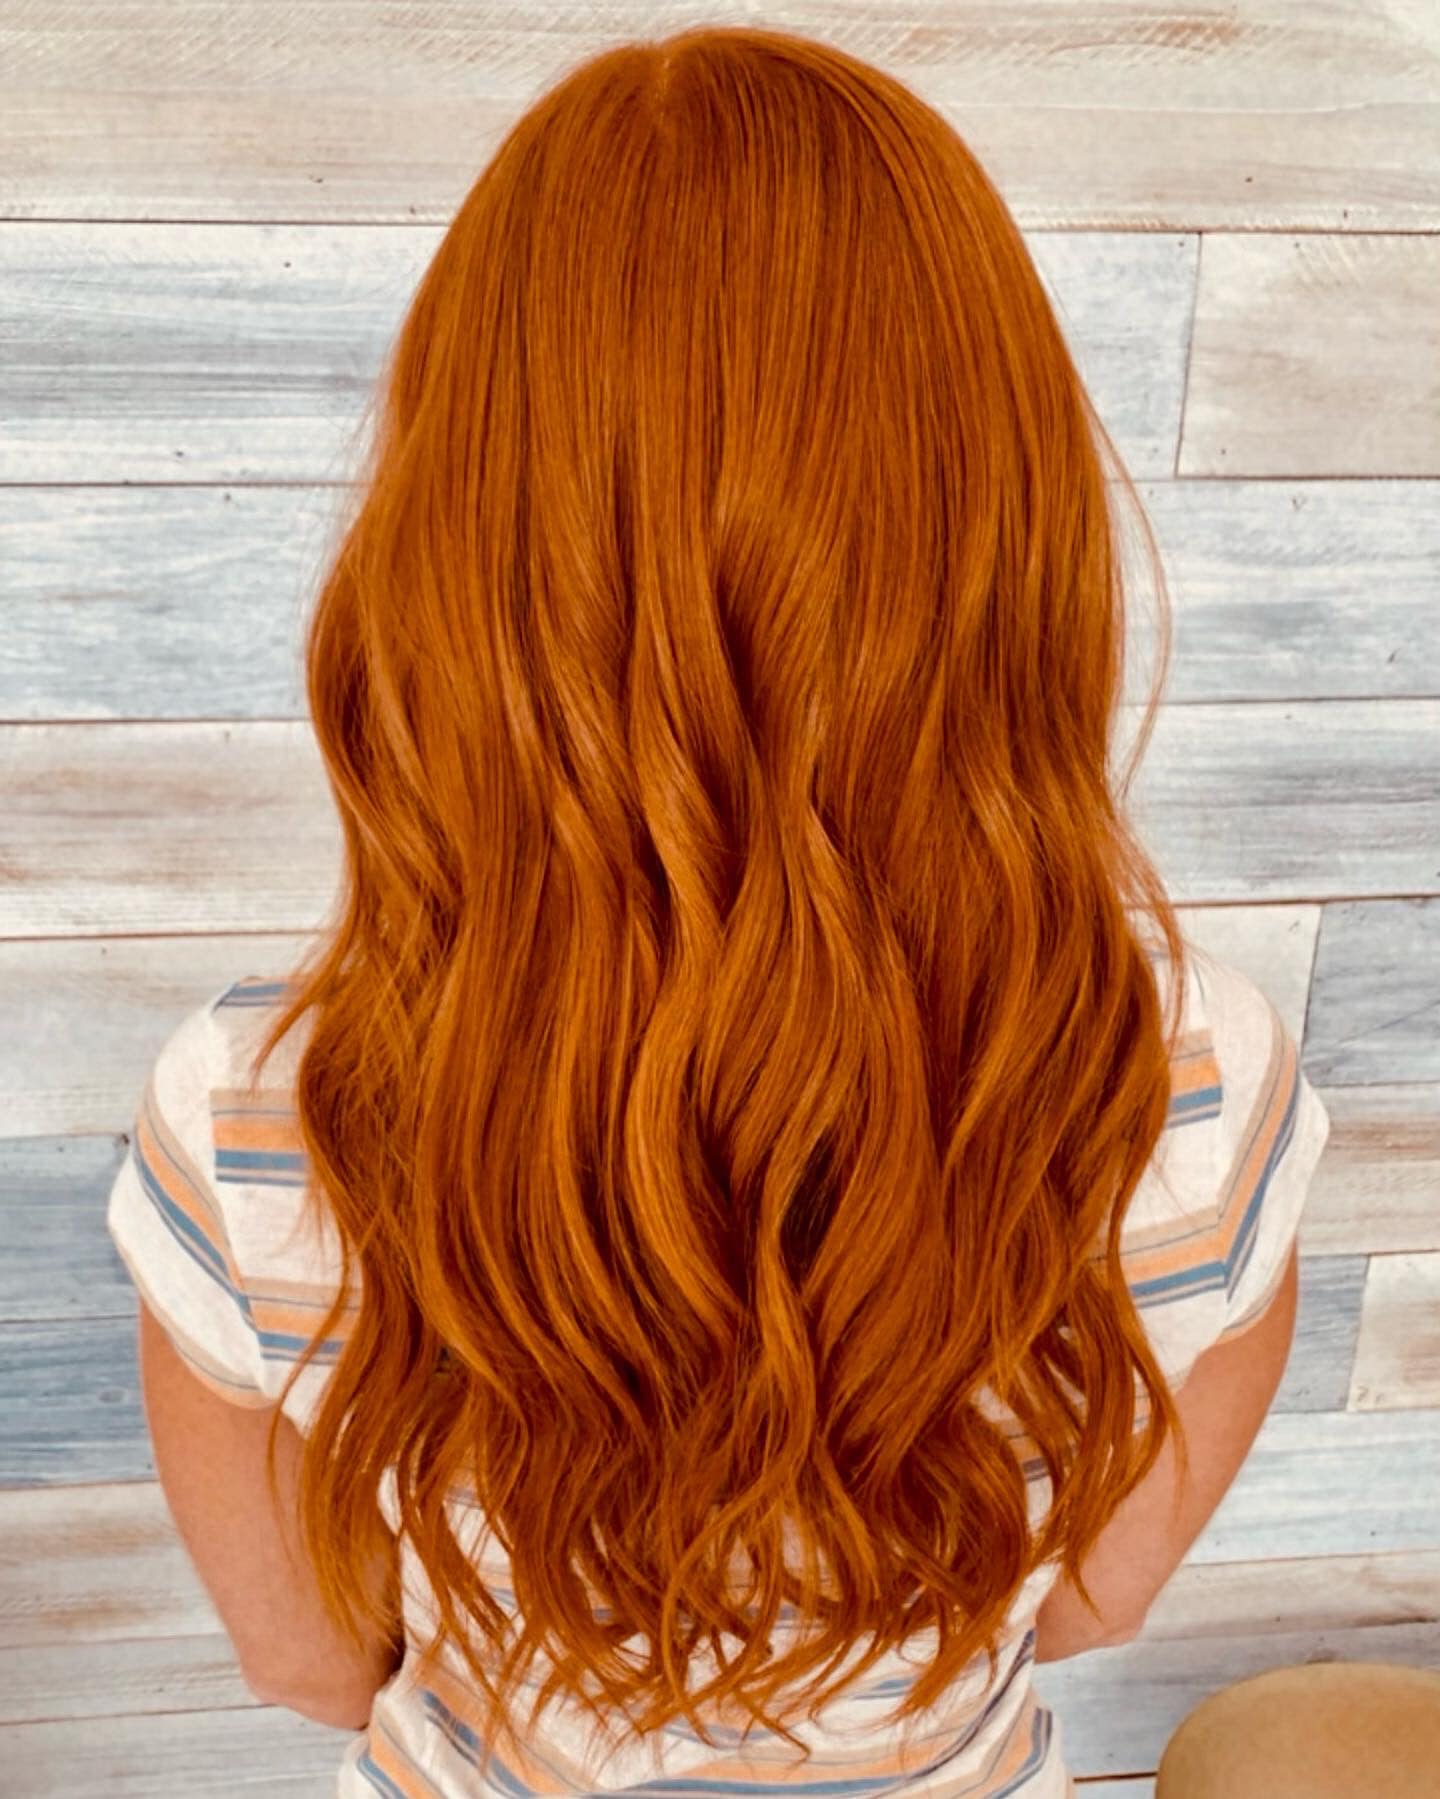 https://undergroundstylist.com/wp-content/uploads/2024/01/Extensions-red-hair.jpeg